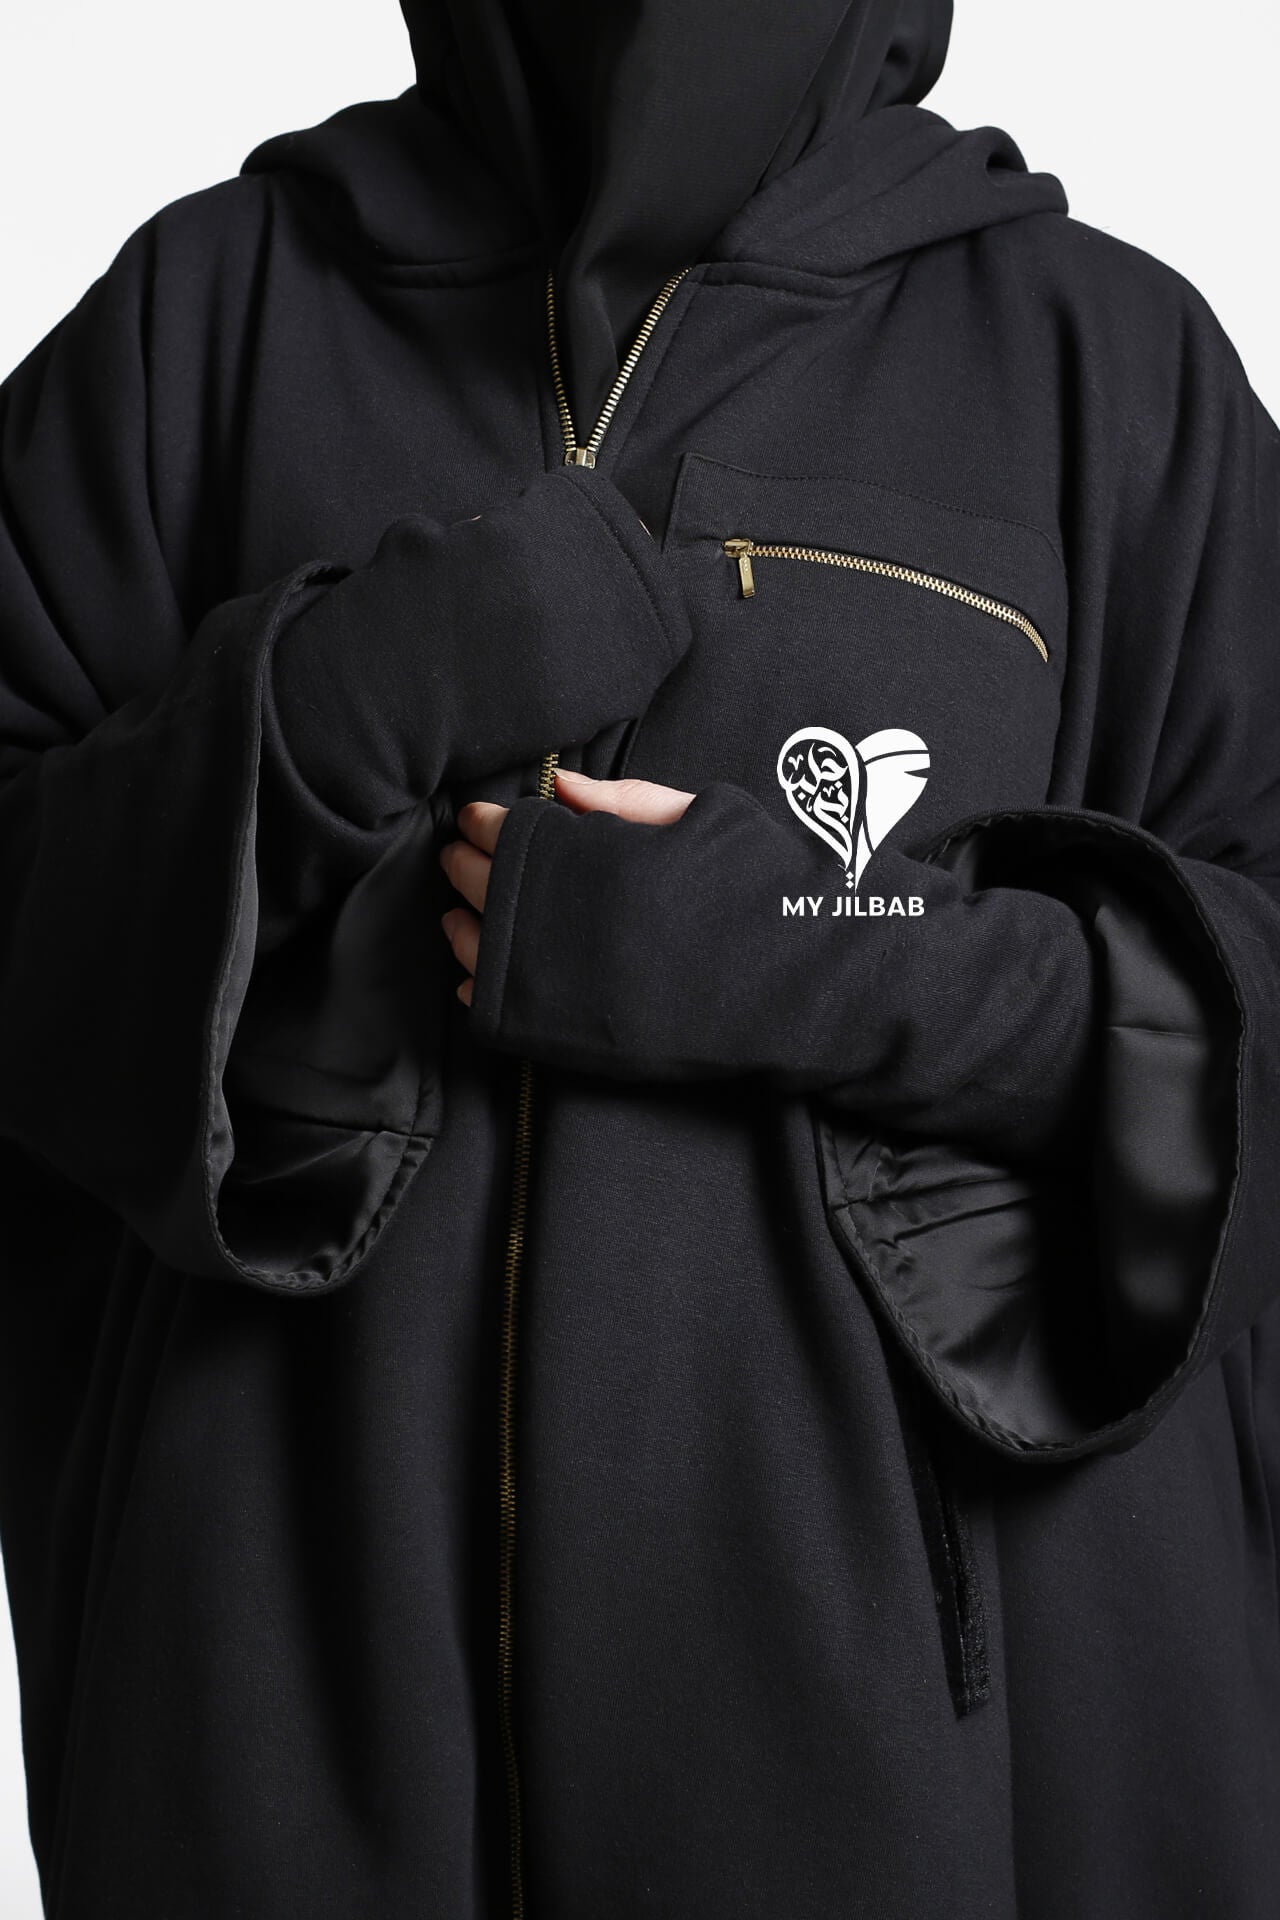 Sleeves with mittons and thumb holes